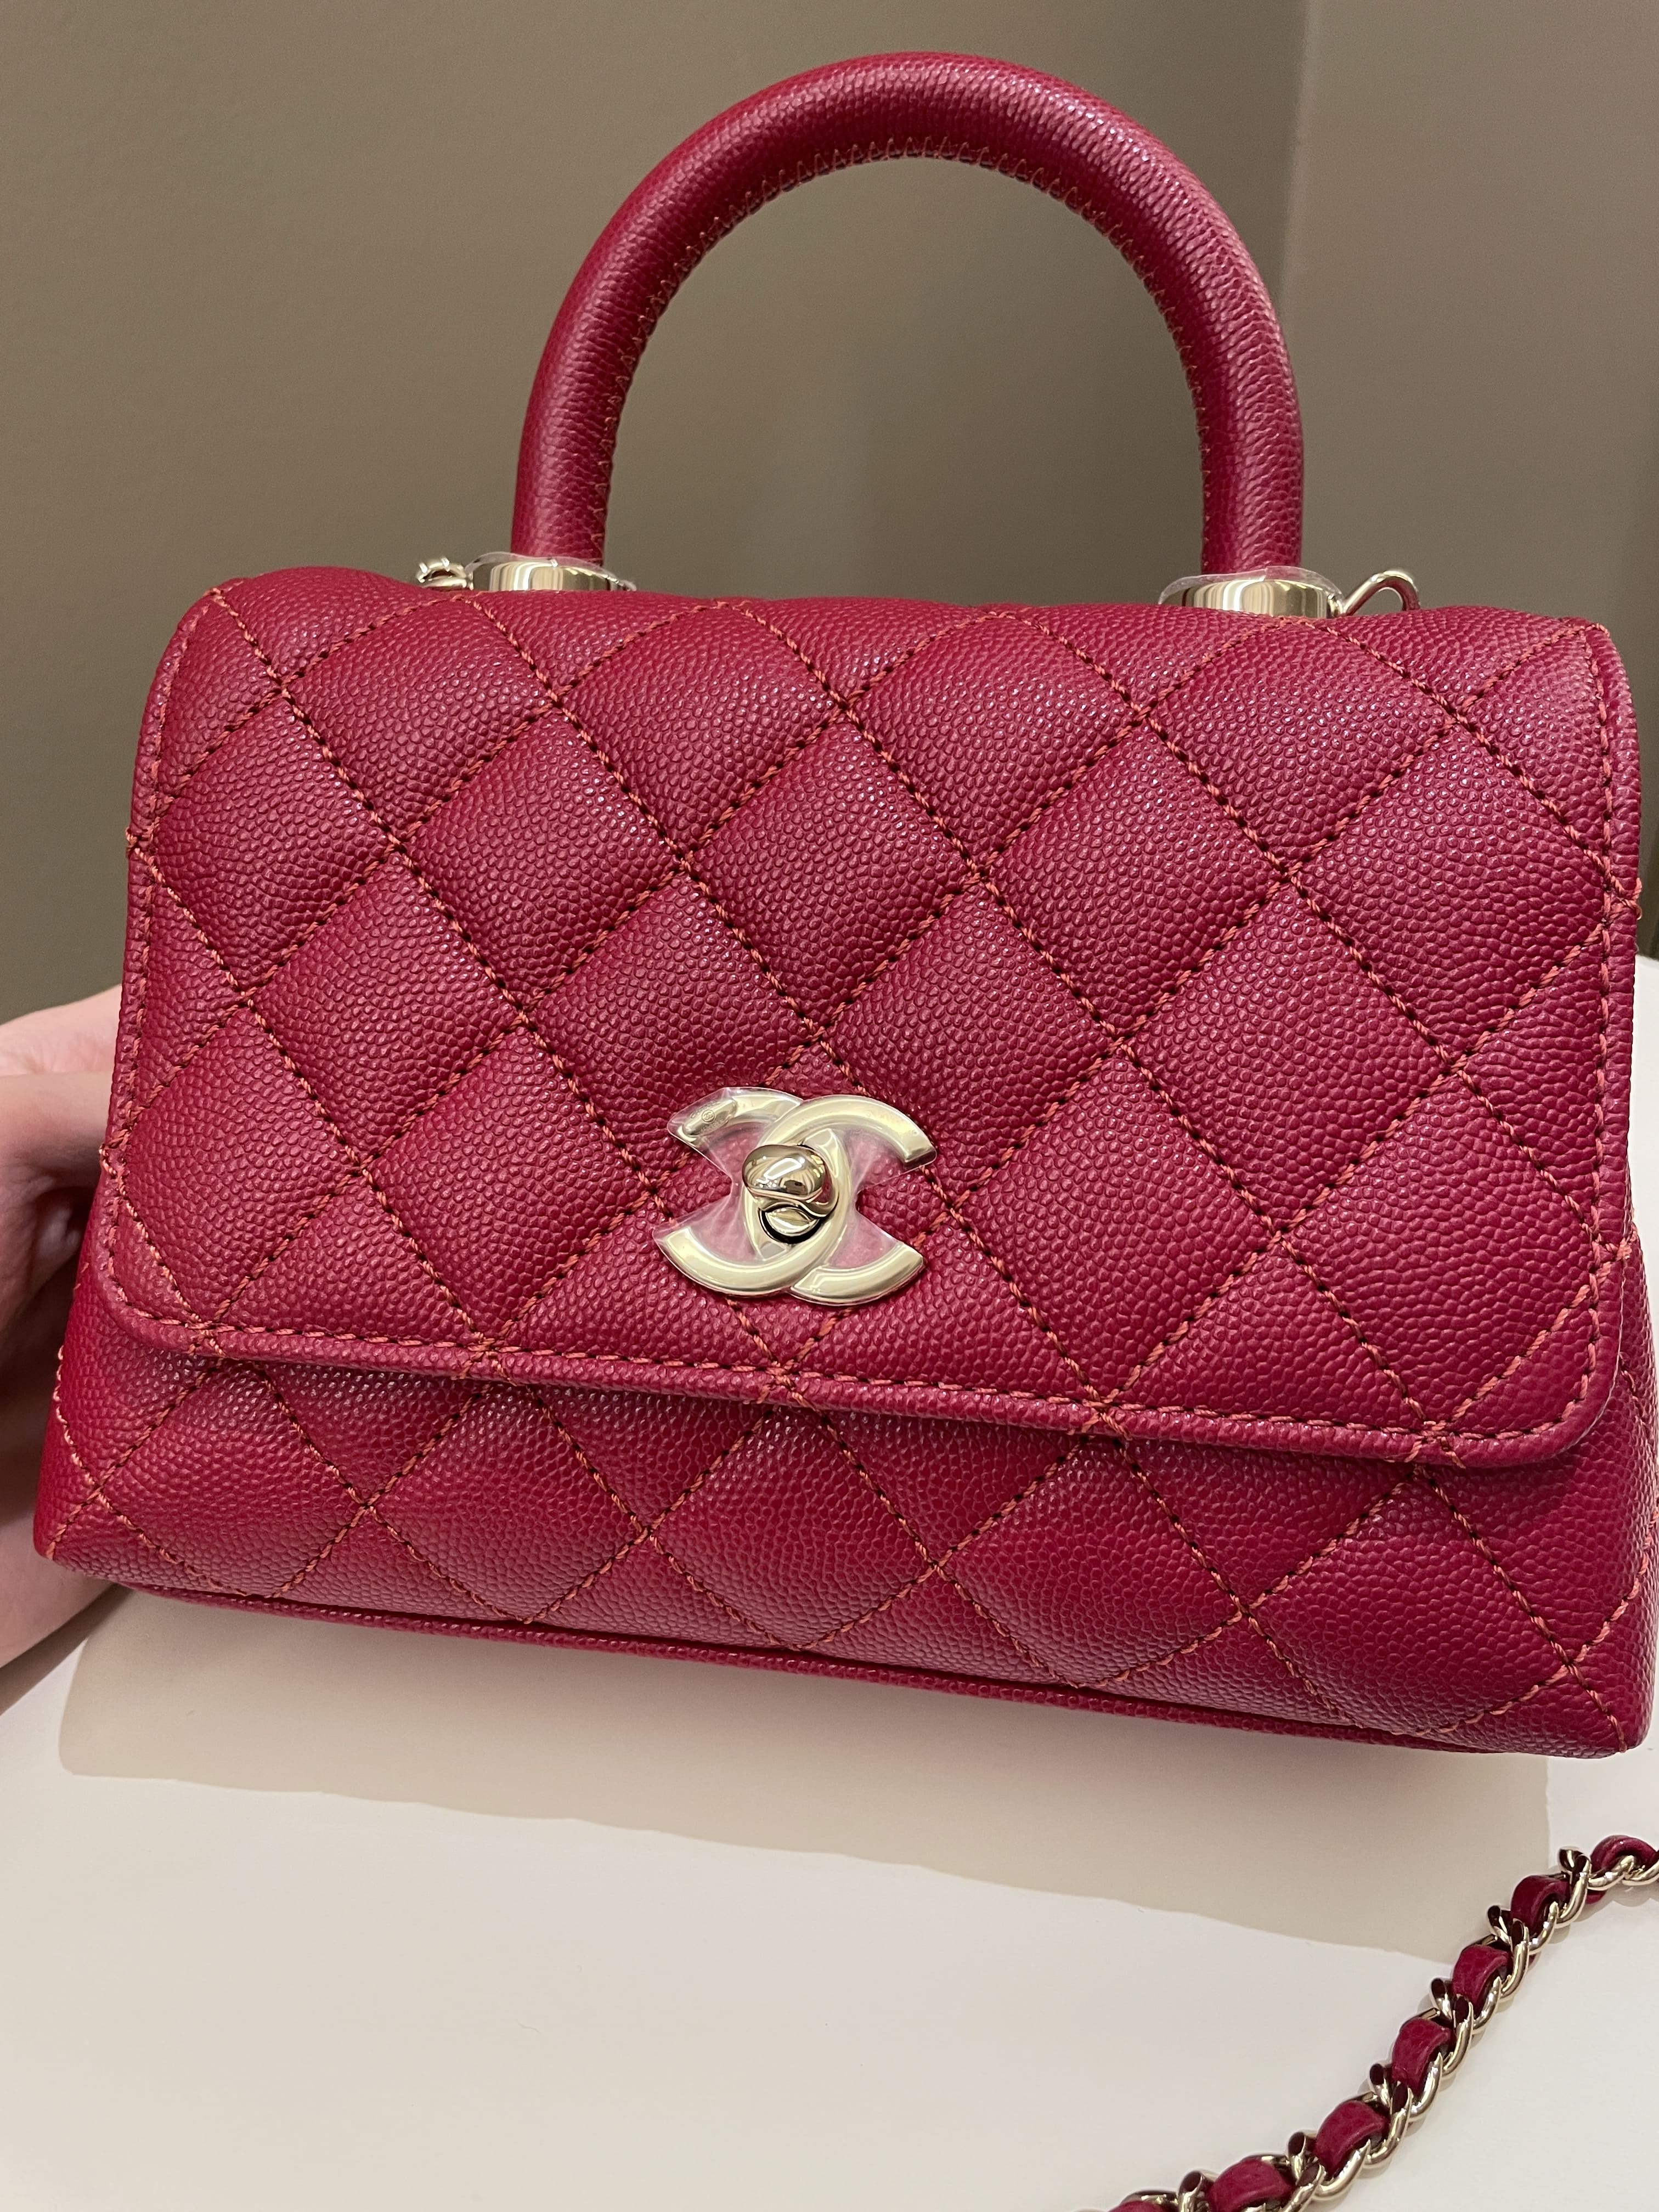 CHANEL Caviar Quilted Mini Coco Handle Flap Red | FASHIONPHILE